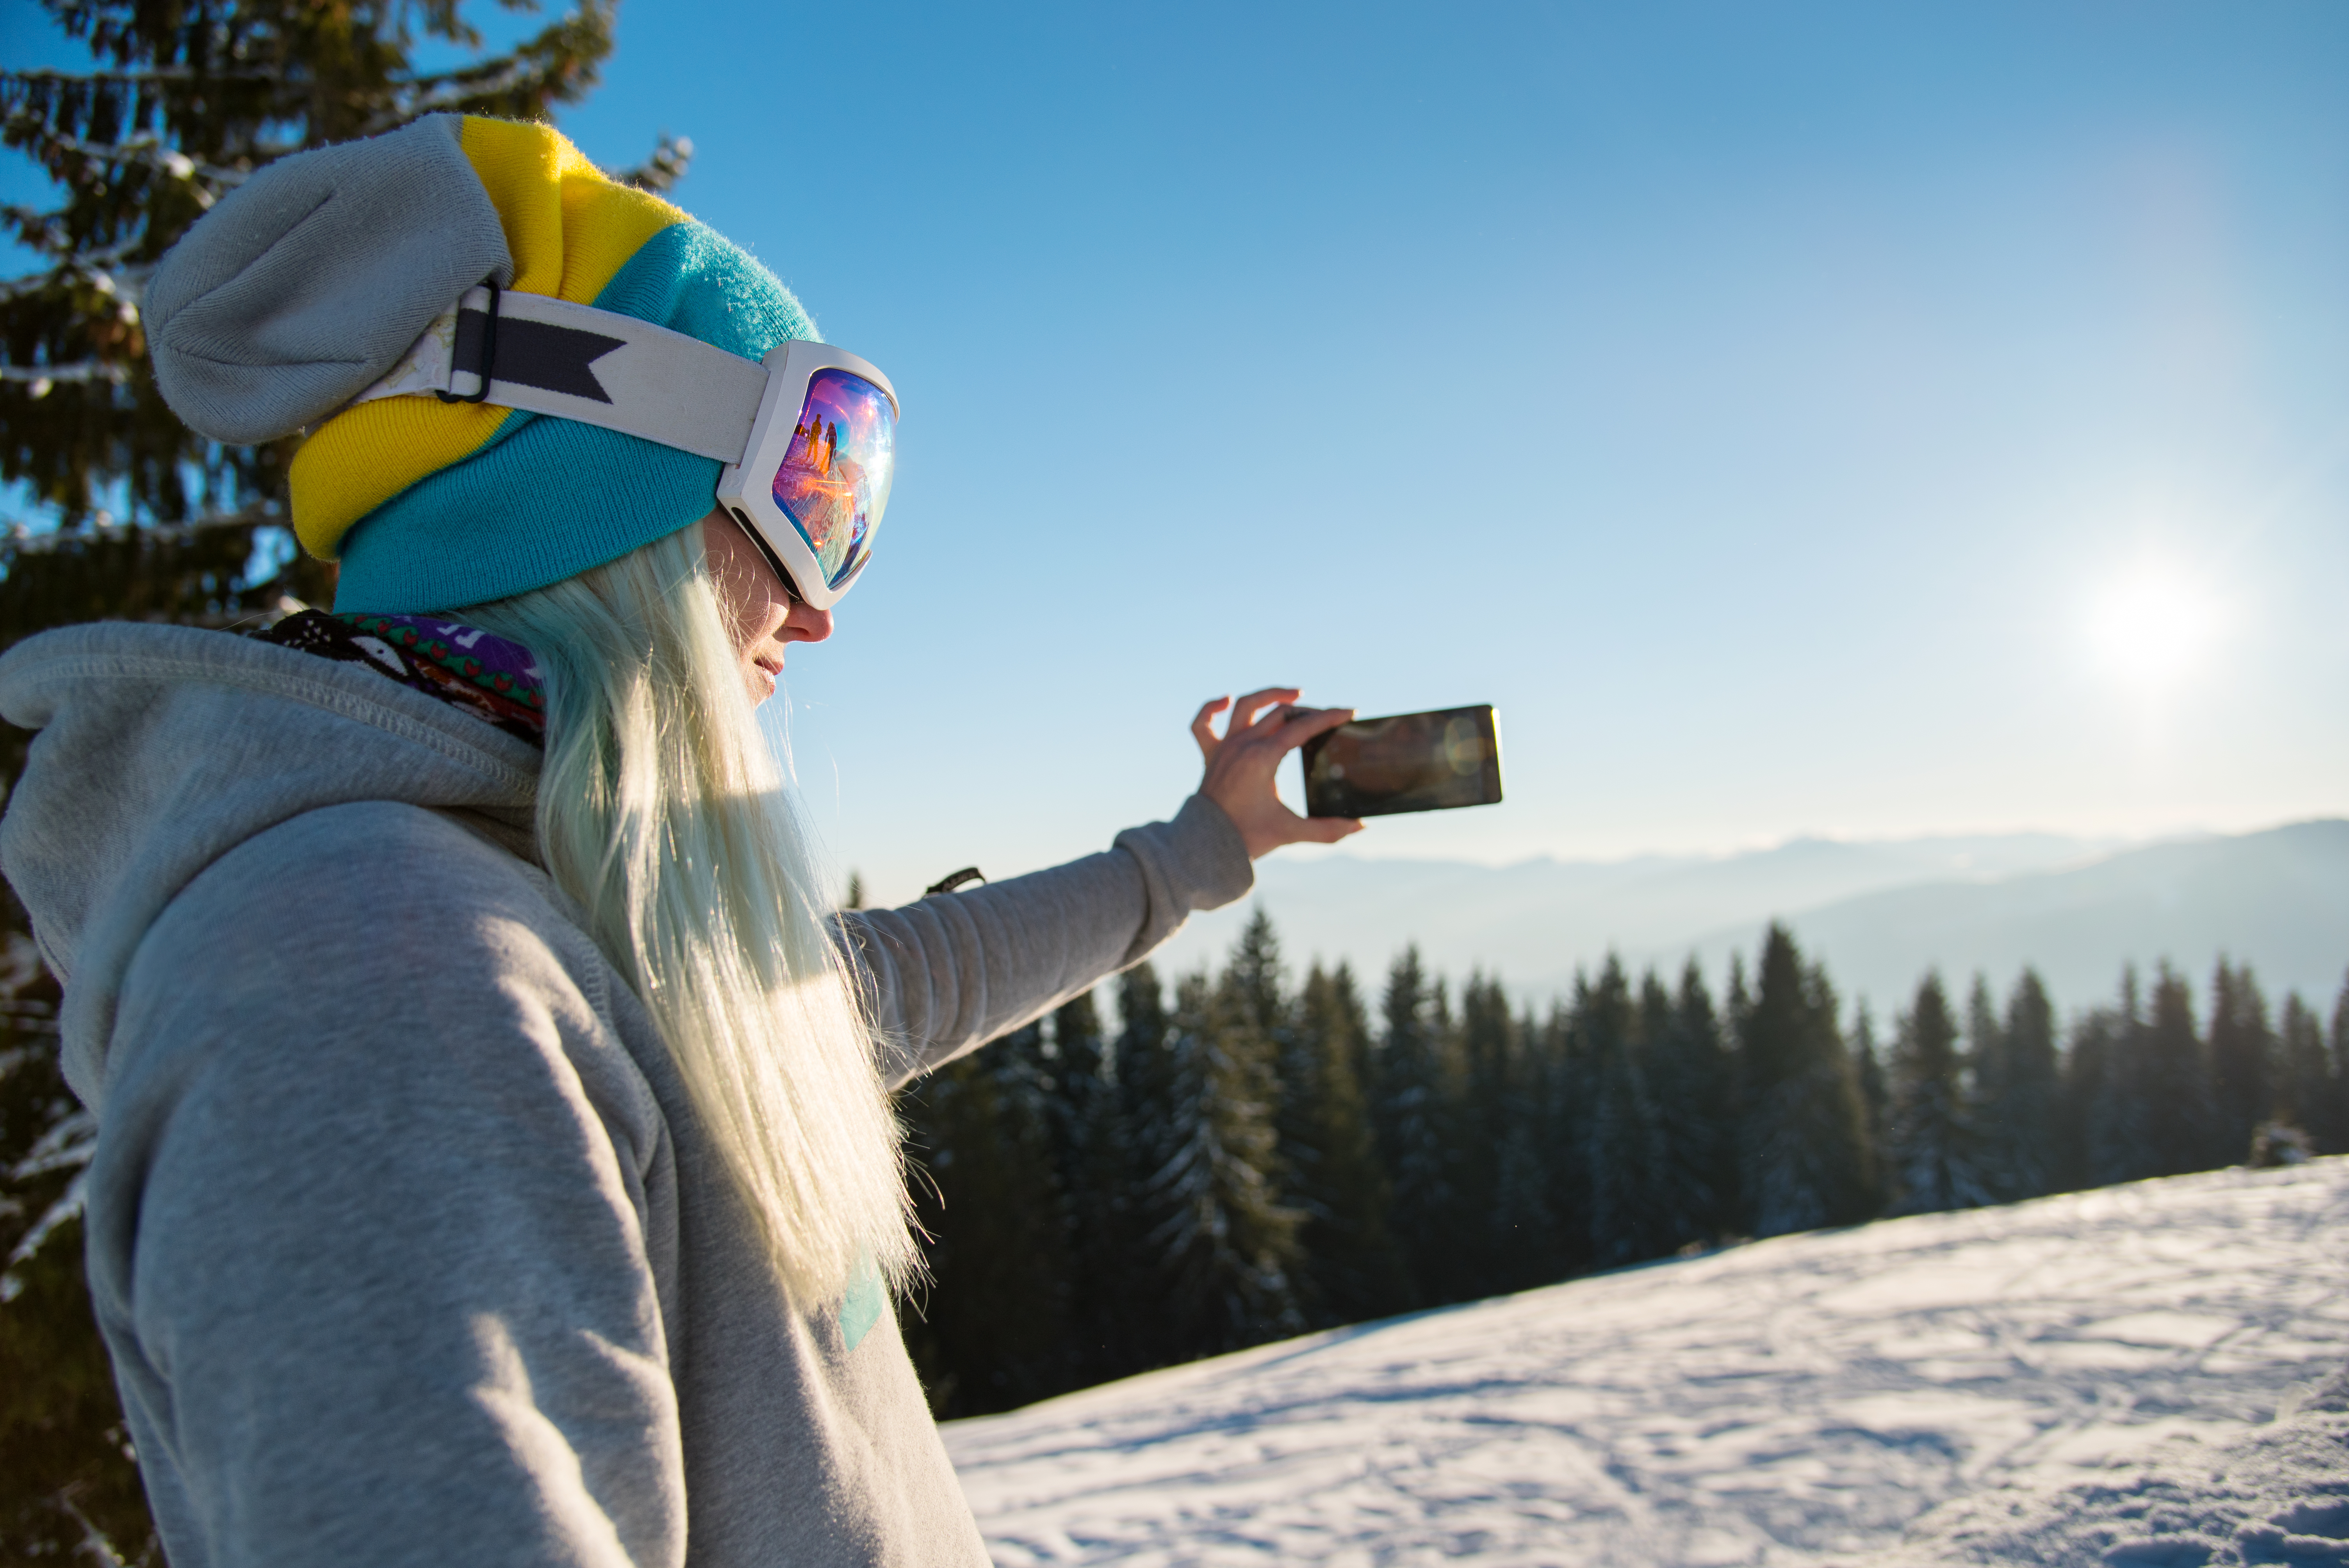 Snowboarder using smart phone in the mountains